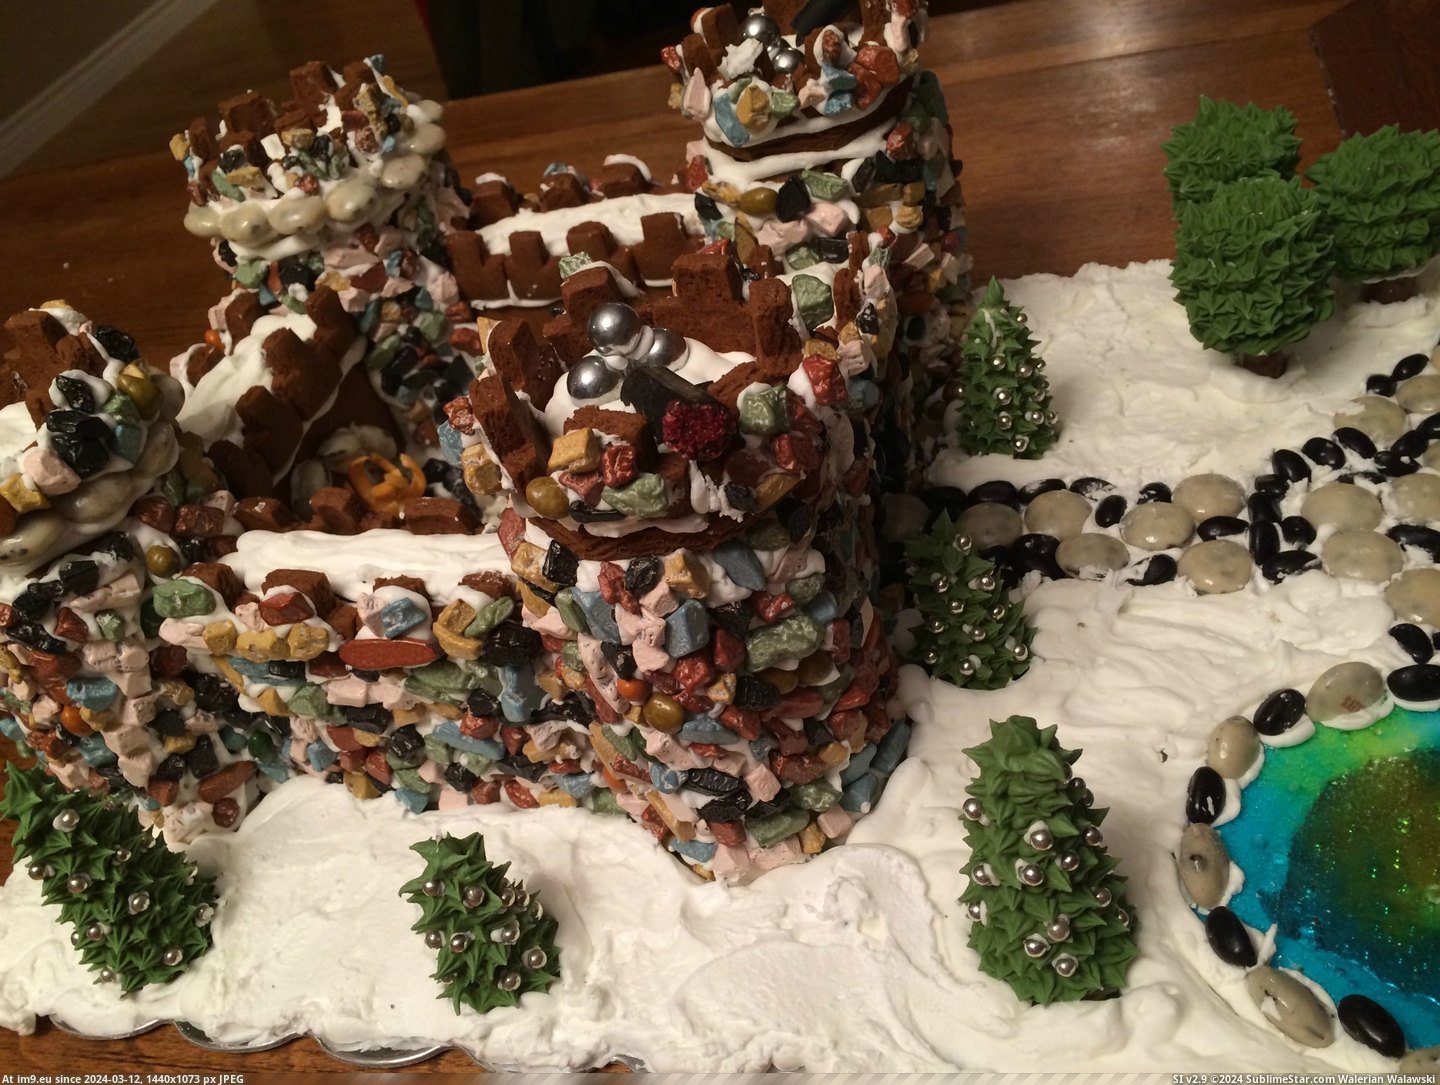 #Husband #Get #Our #Divorced #Collaborated #Project #Gingerbread #Success [Pics] My husband and I collaborated on our first gingerbread project and didn't get divorced...success! 9 Pic. (Obraz z album My r/PICS favs))